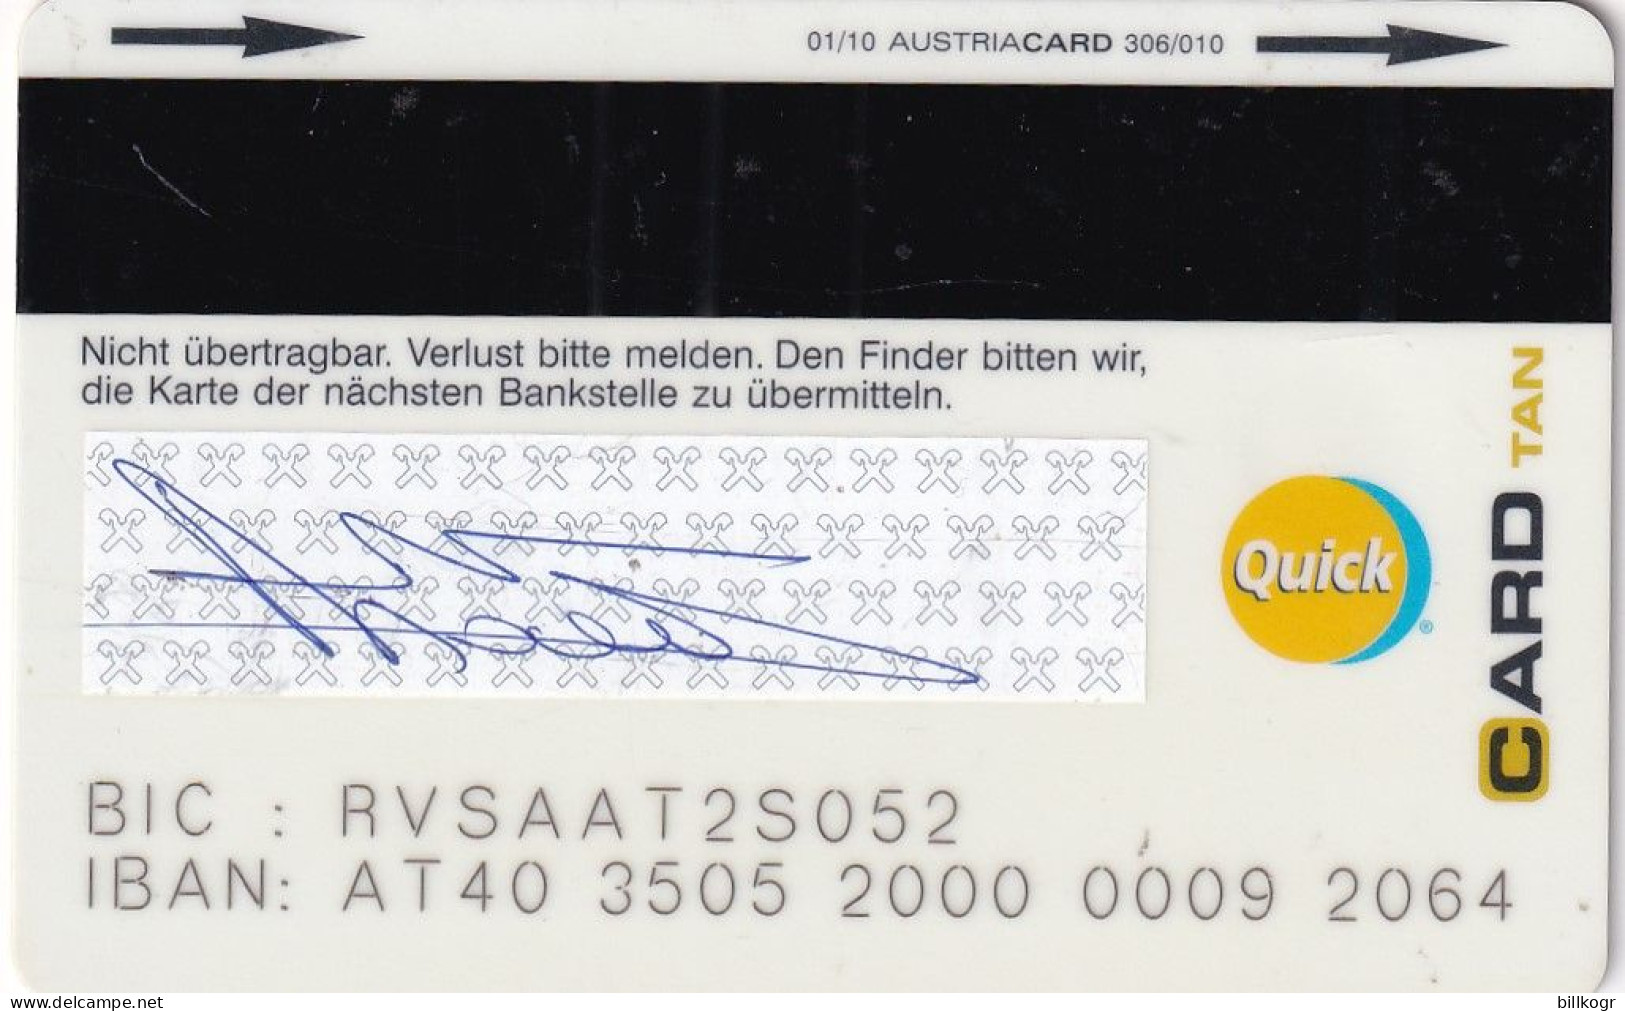 ALBANIA - Raiffeisen Bank Maestro Card, 01/10, Used - Credit Cards (Exp. Date Min. 10 Years)